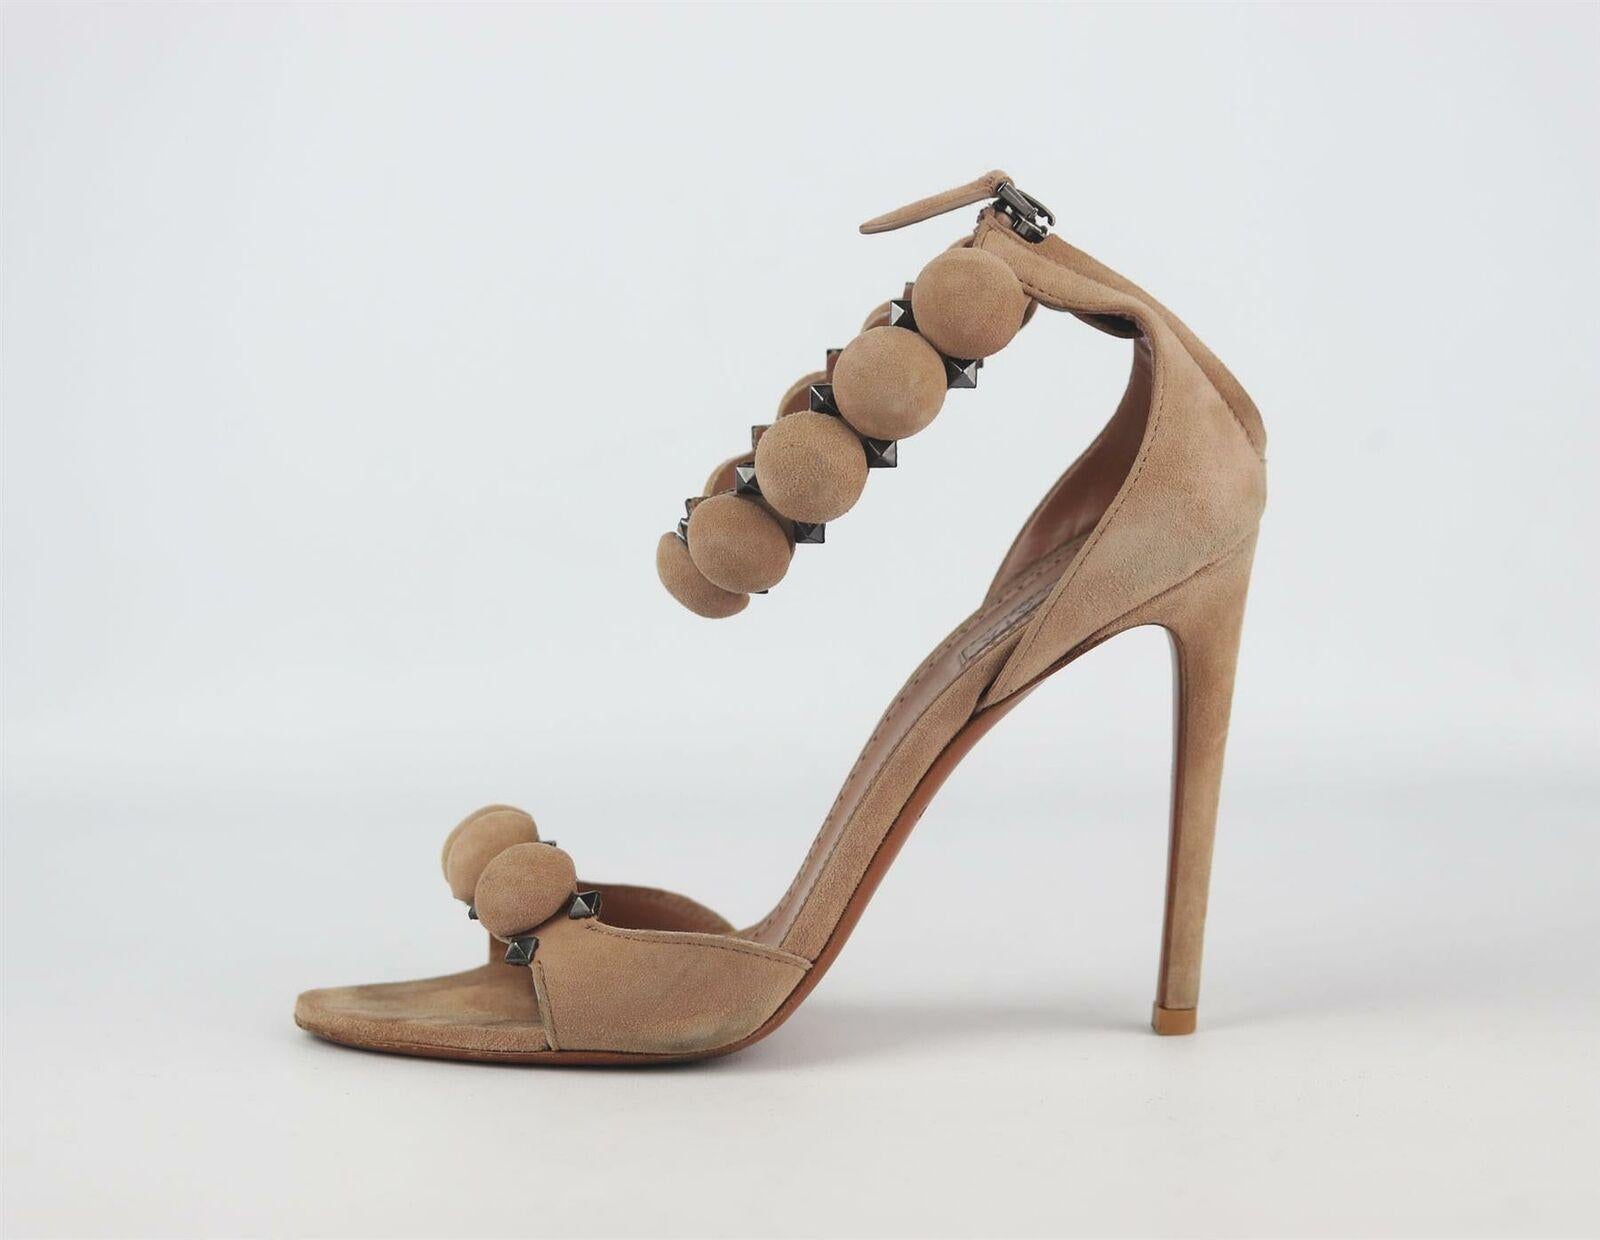 Alaïa's 'Bombe' sandals are deftly crafted by hand and beautiful to admire - this blush-pink suede pair is decorated with spheres and gunmetal pyramid studs at the supportive ankle strap.
Heel measures approximately 90mm/ 3.5 inches
Blush suede